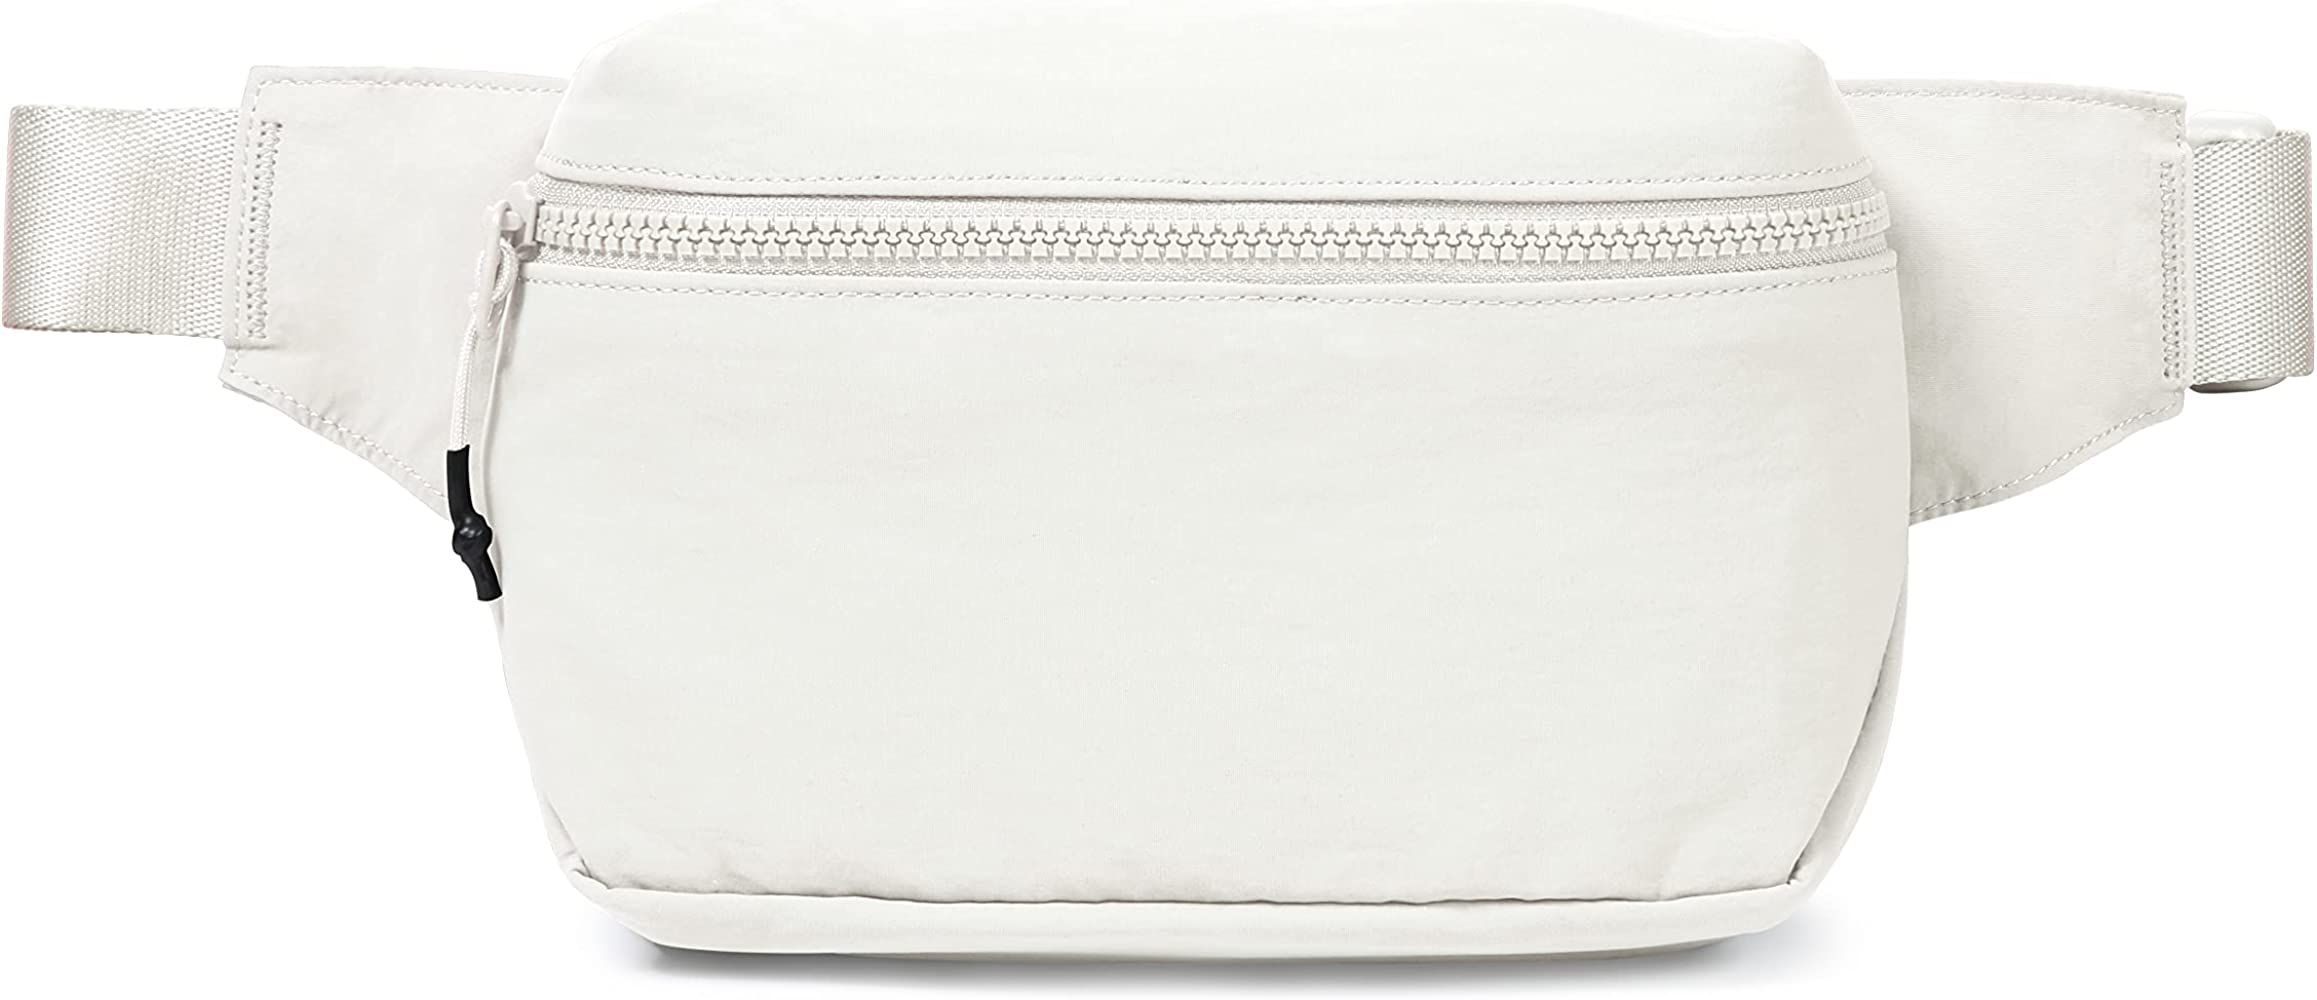 ODODOS 2L Belt Bag for Women Men, Crossbody Fanny Packs with Adjustable Strap Waist Pouch for Workout Hiking Running Travel, White | Amazon (US)